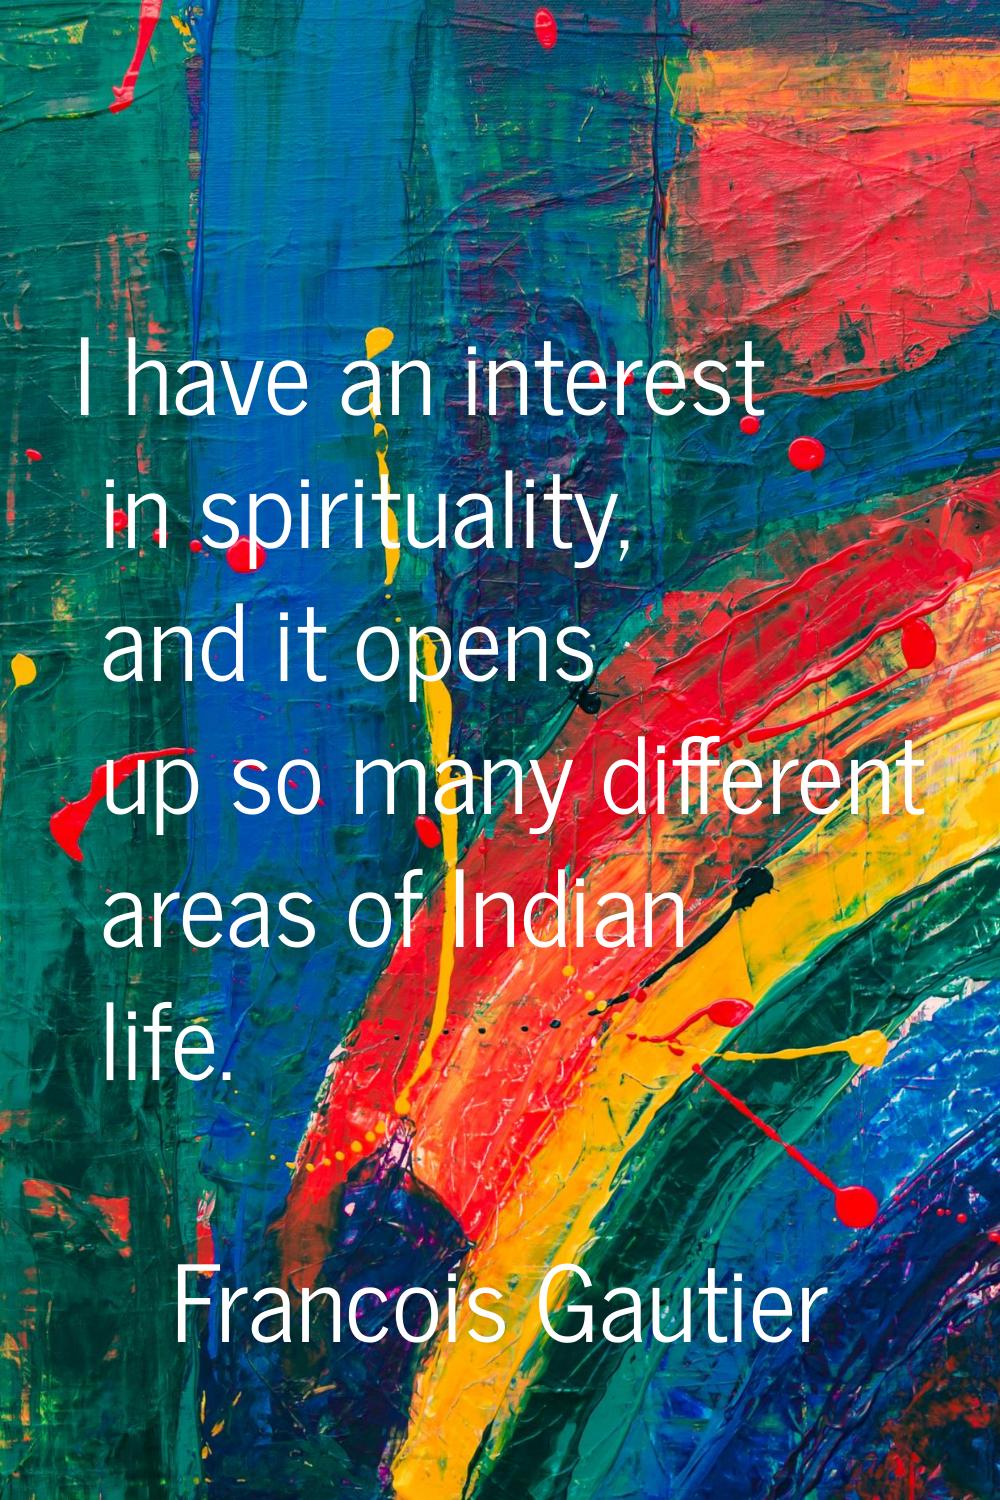 I have an interest in spirituality, and it opens up so many different areas of Indian life.